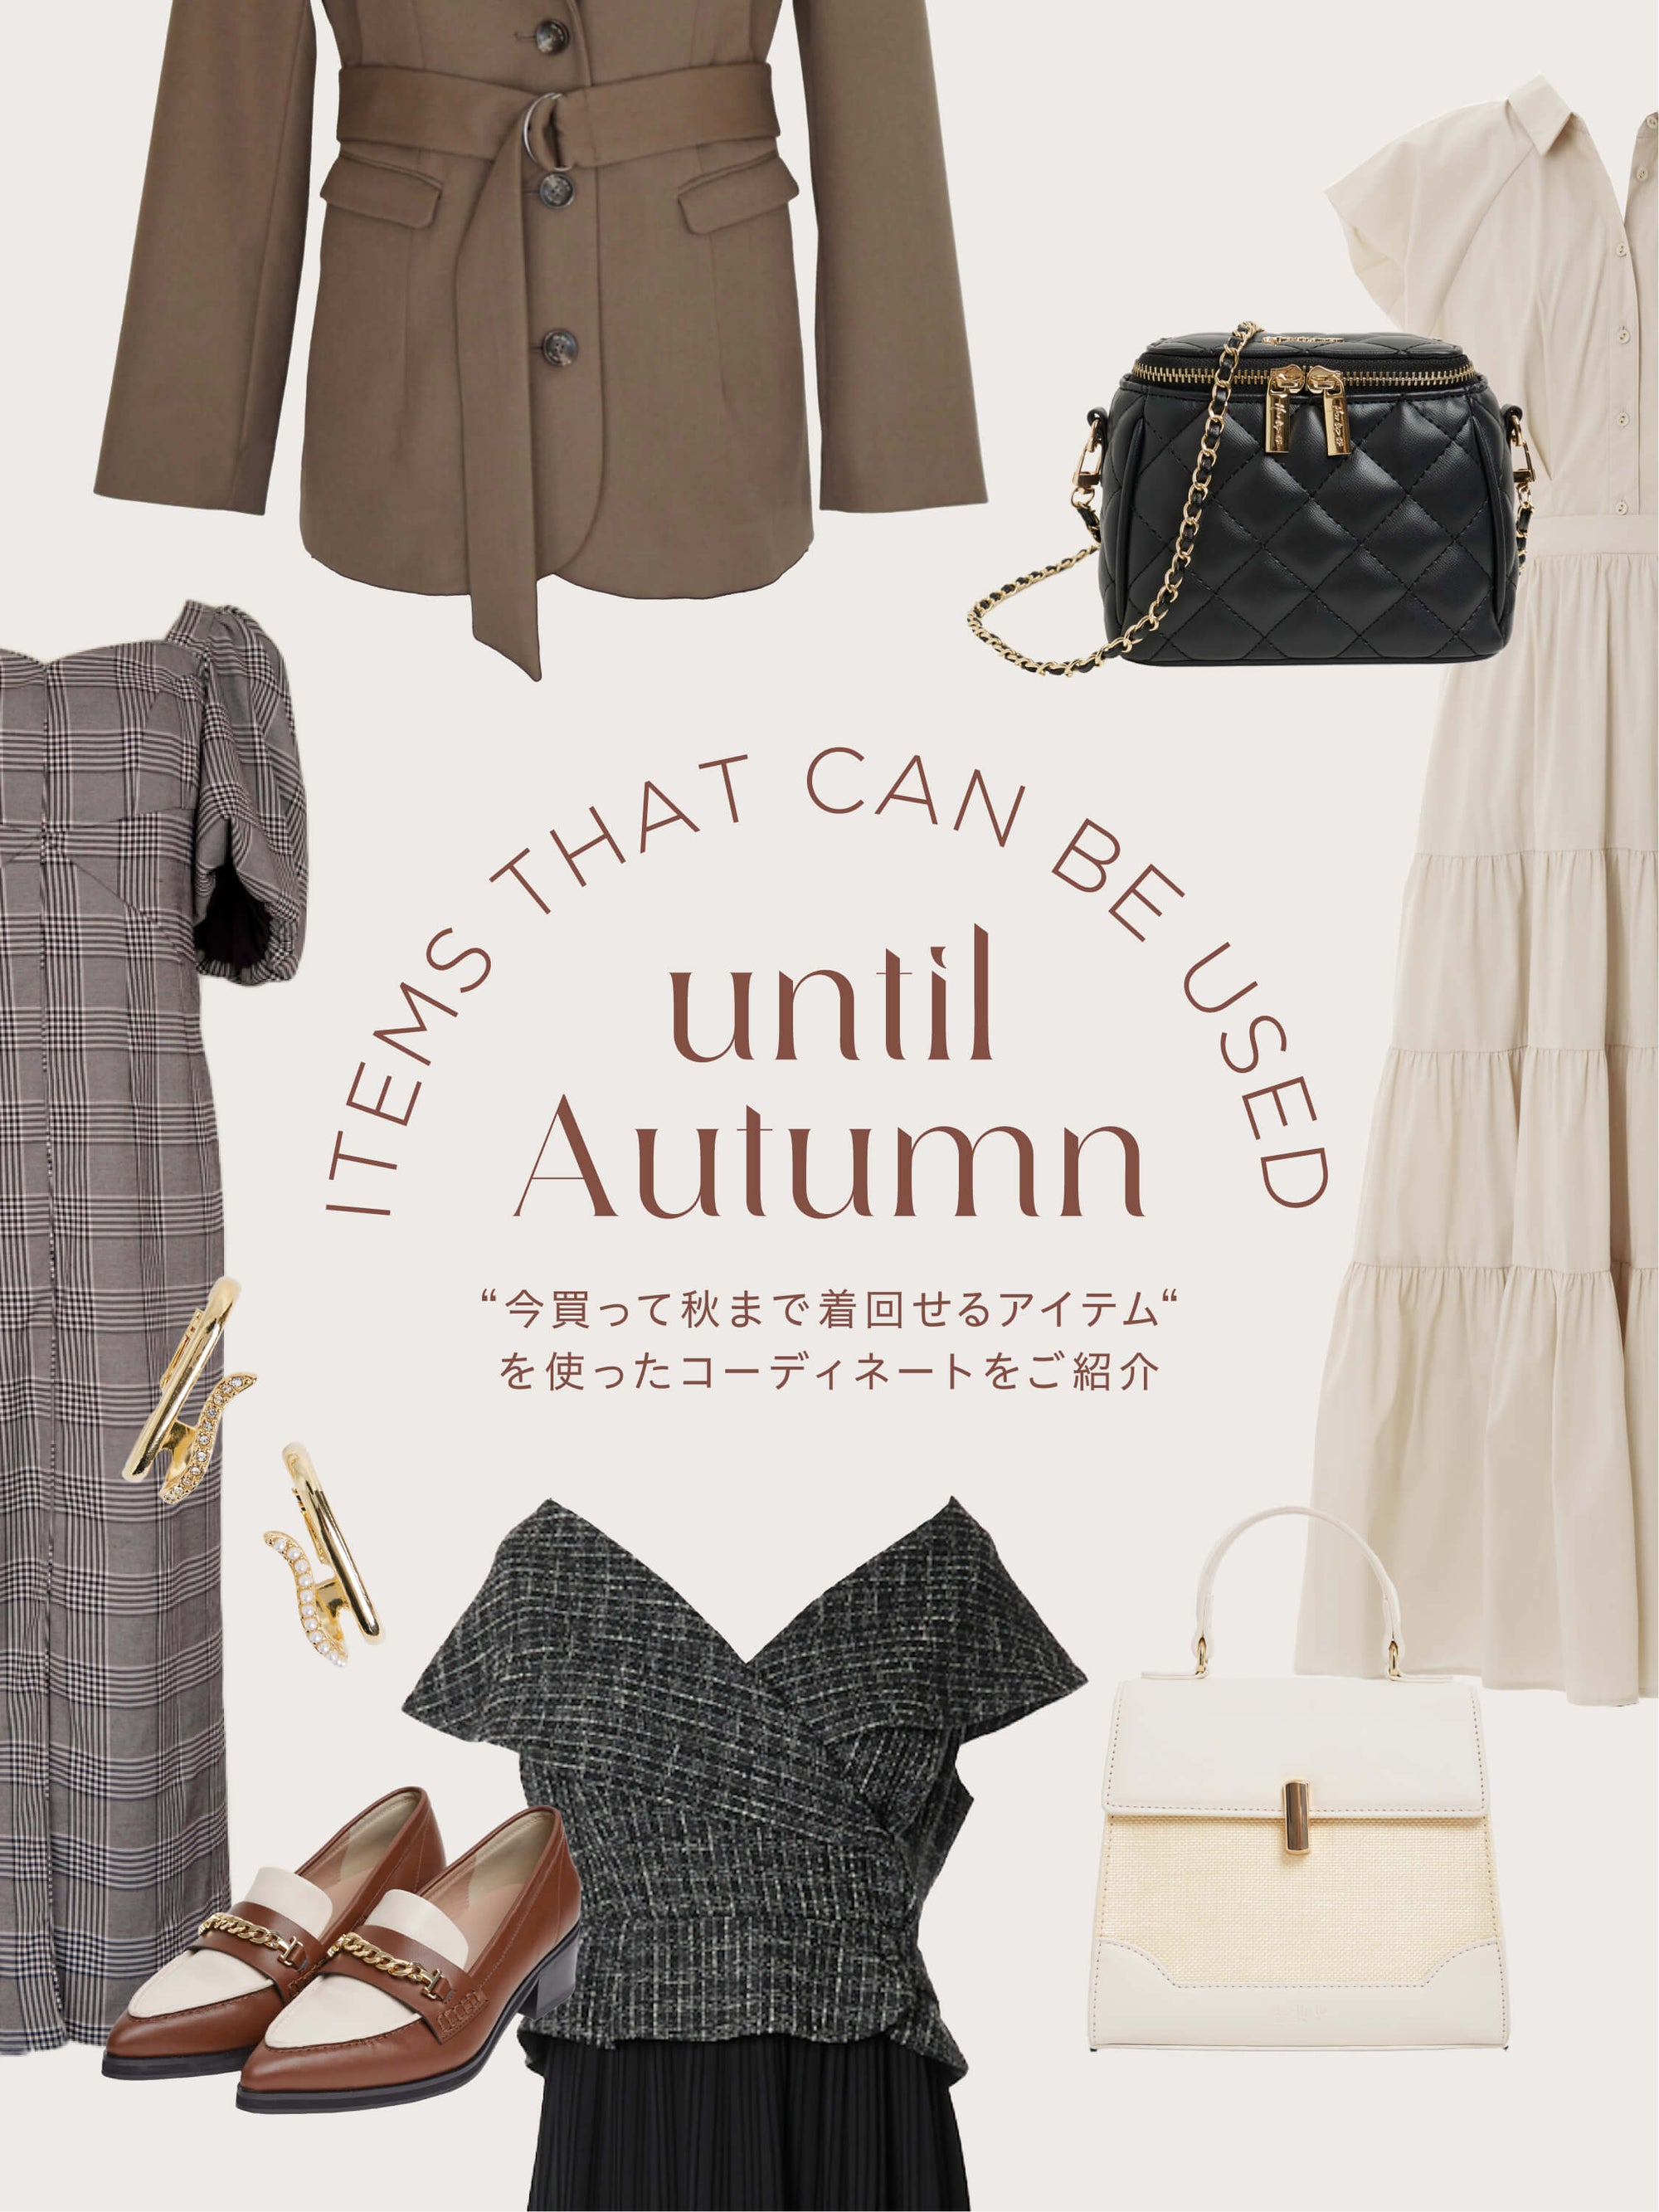 Items that can be used until Autumn